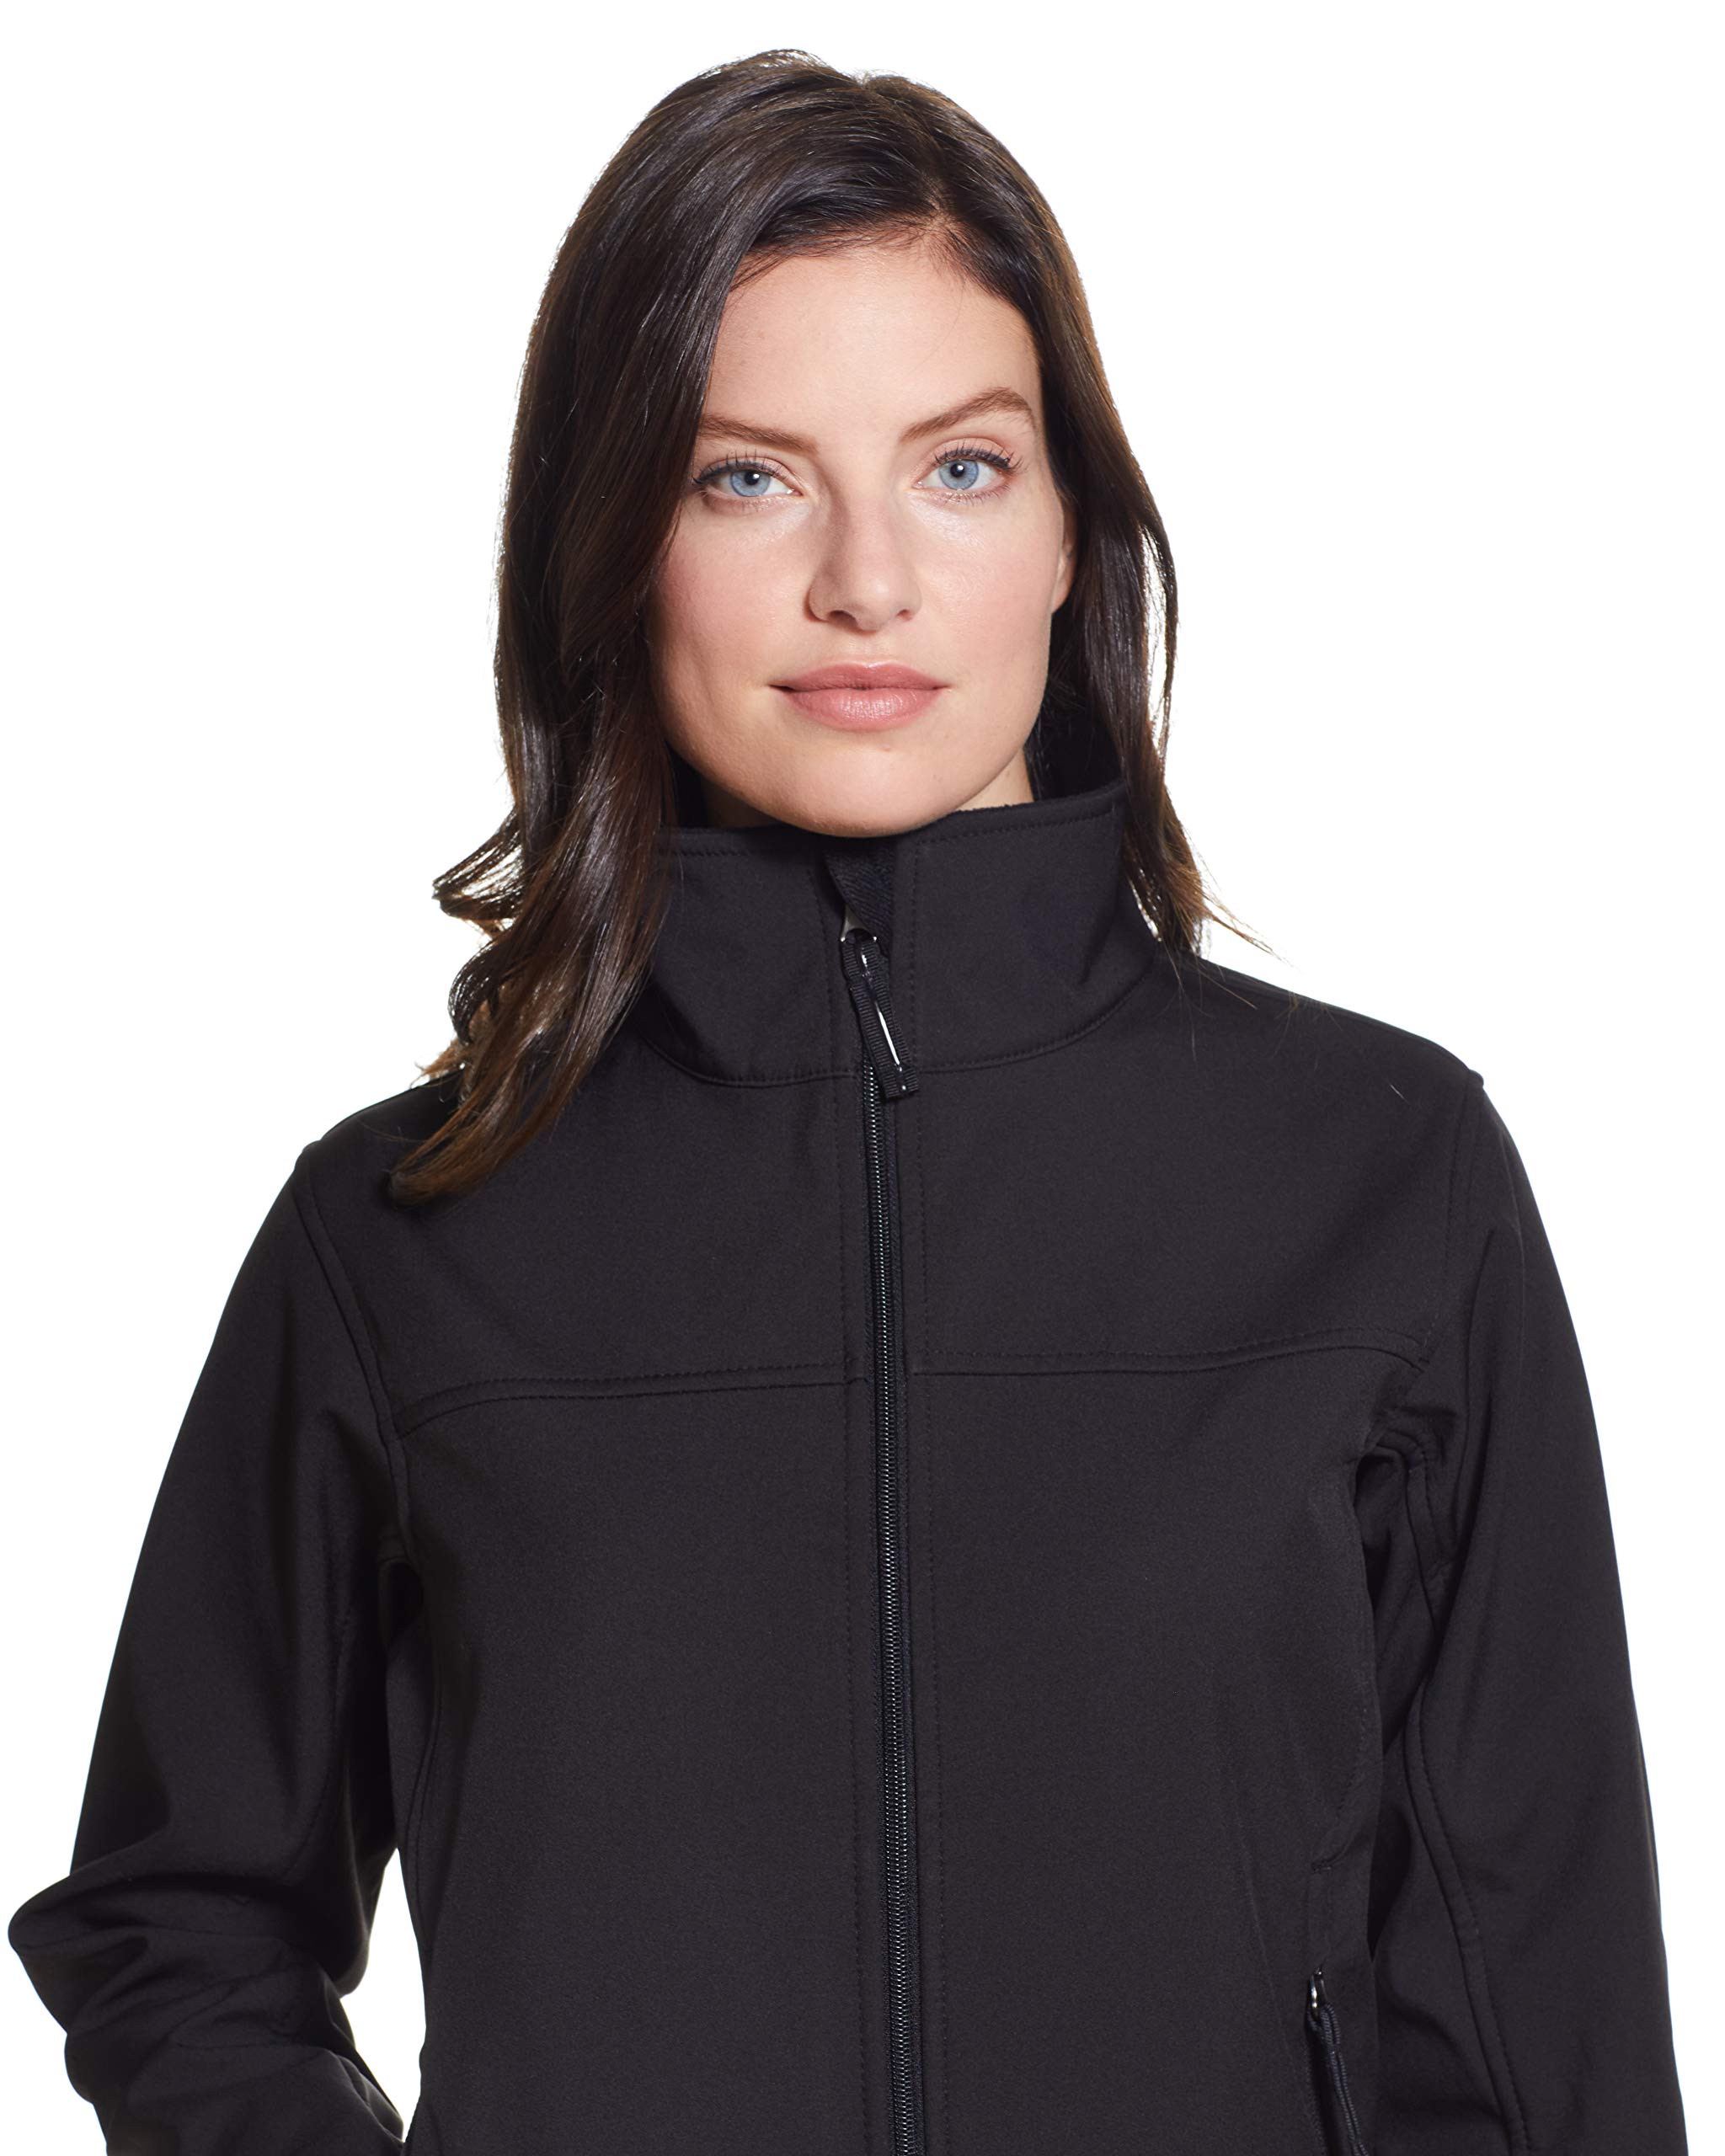 Weatherproof Womens Lightweight Water and Wind Resistant Soft Shell Jacket